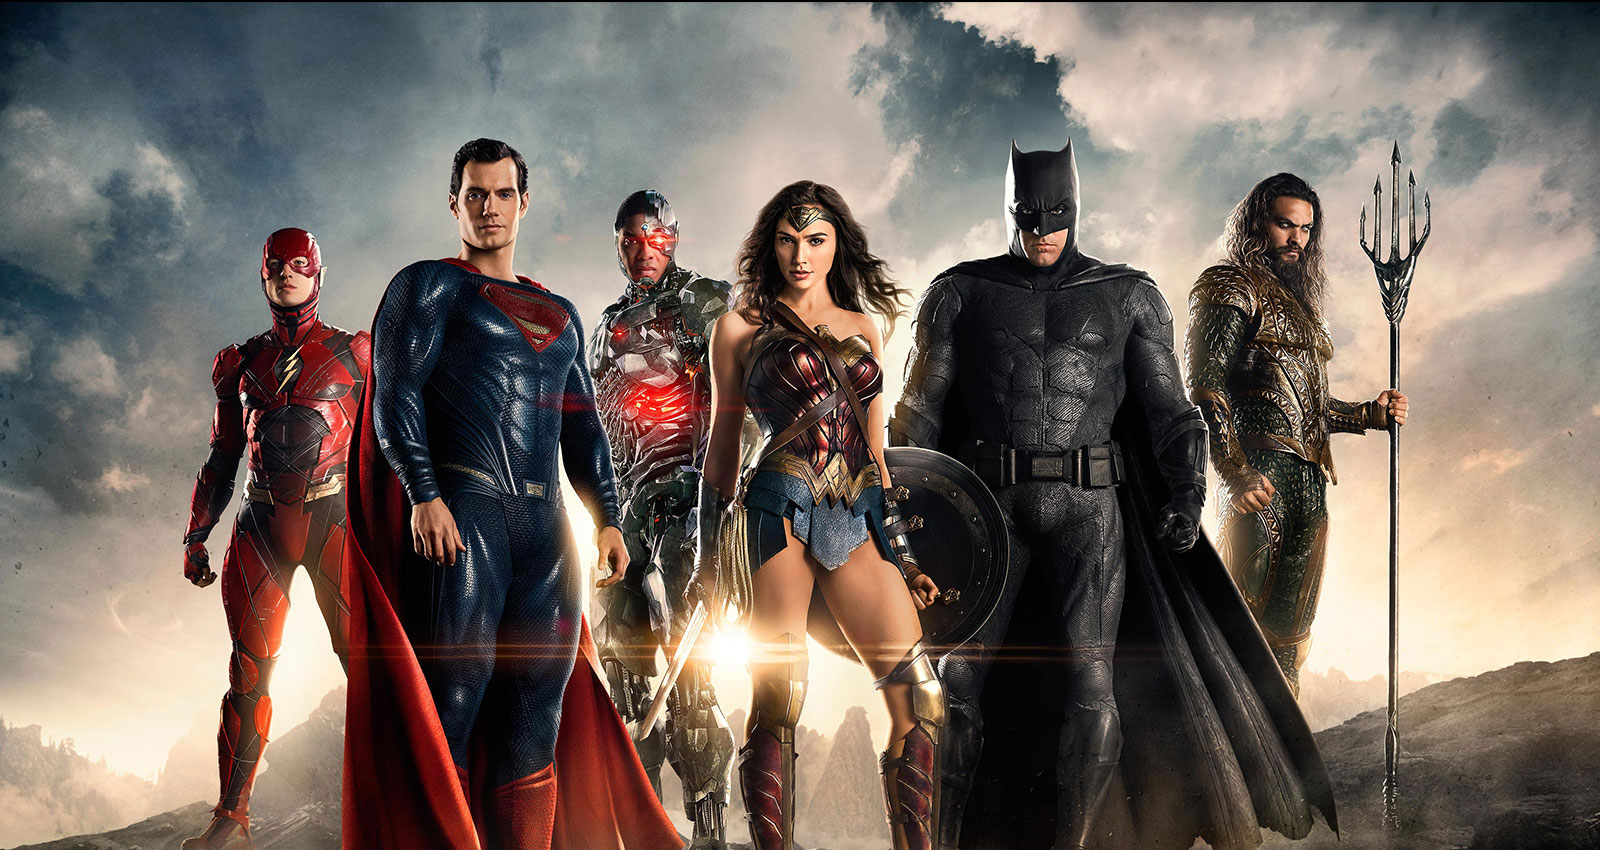 Why Justice League became a bad Marvel movie